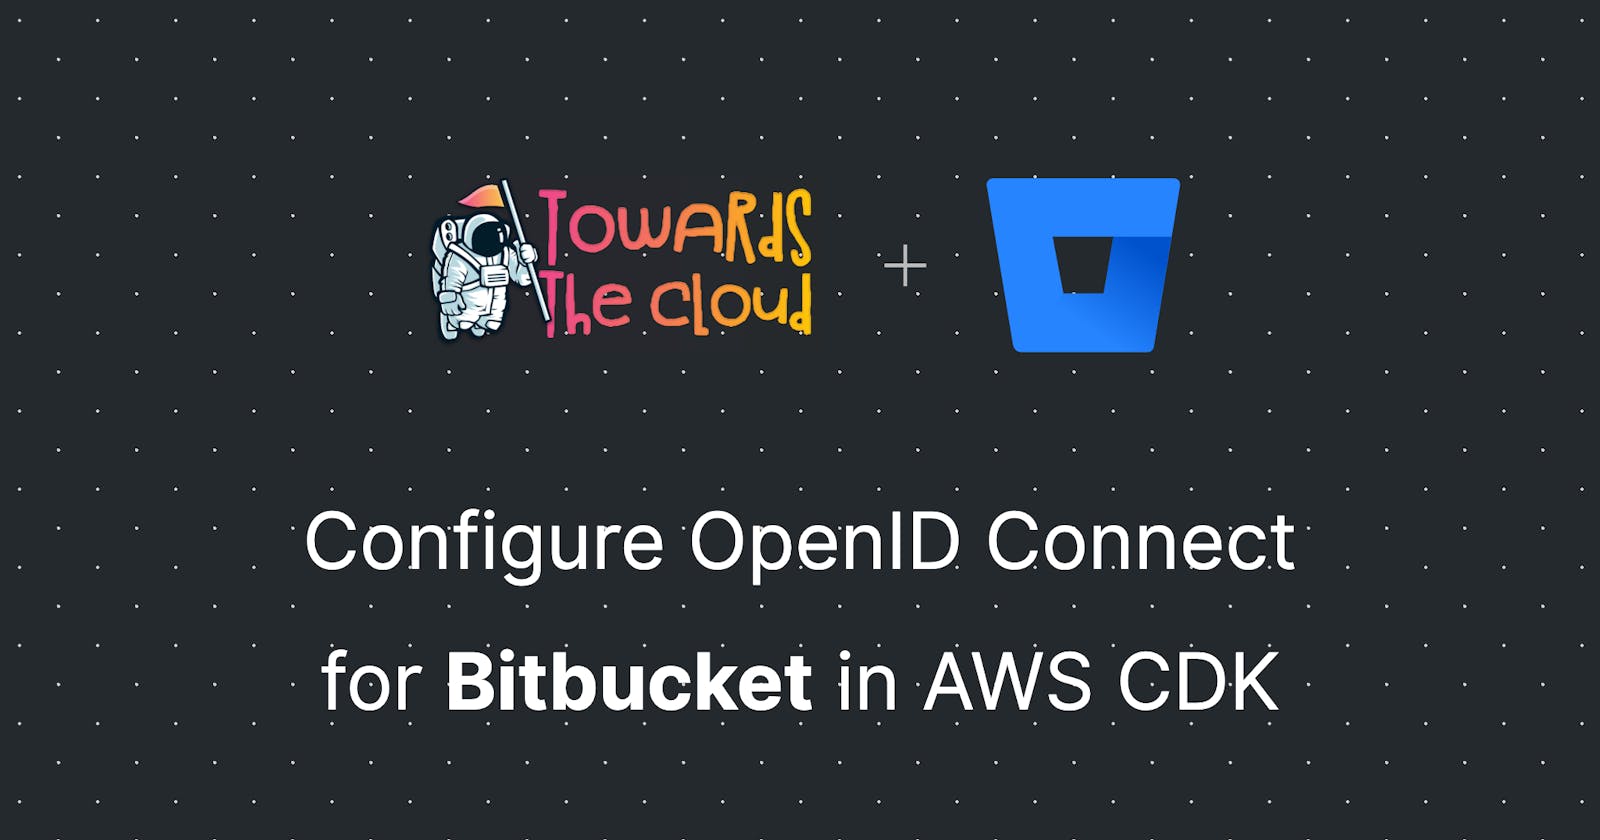 Configure OpenID Connect for Bitbucket in AWS CDK